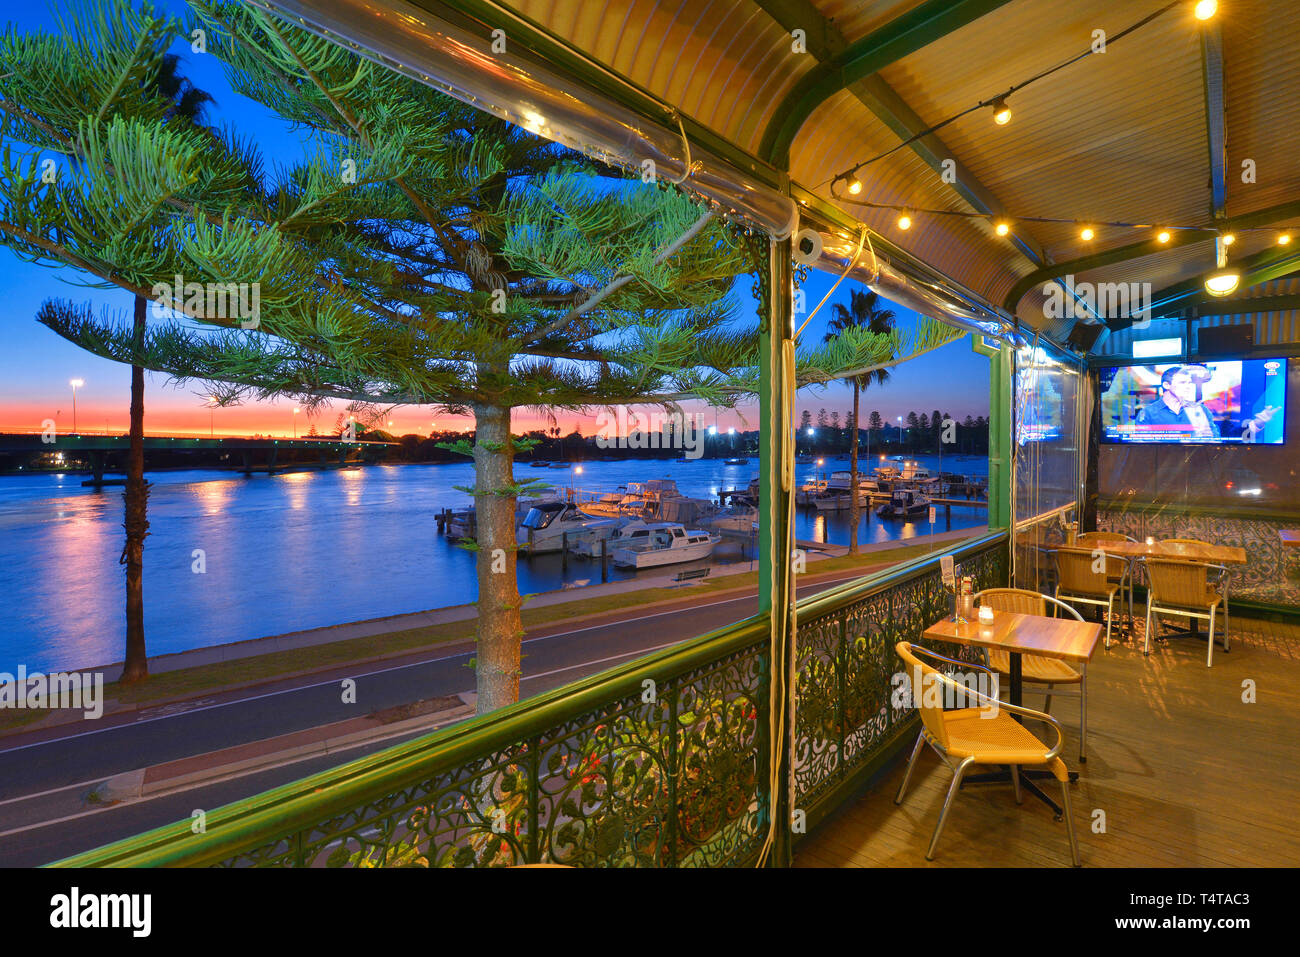 Typical Aussie pub by the Swan river, Perth, Western Australia. Taken at twilight with boats in the foreground. Stock Photo